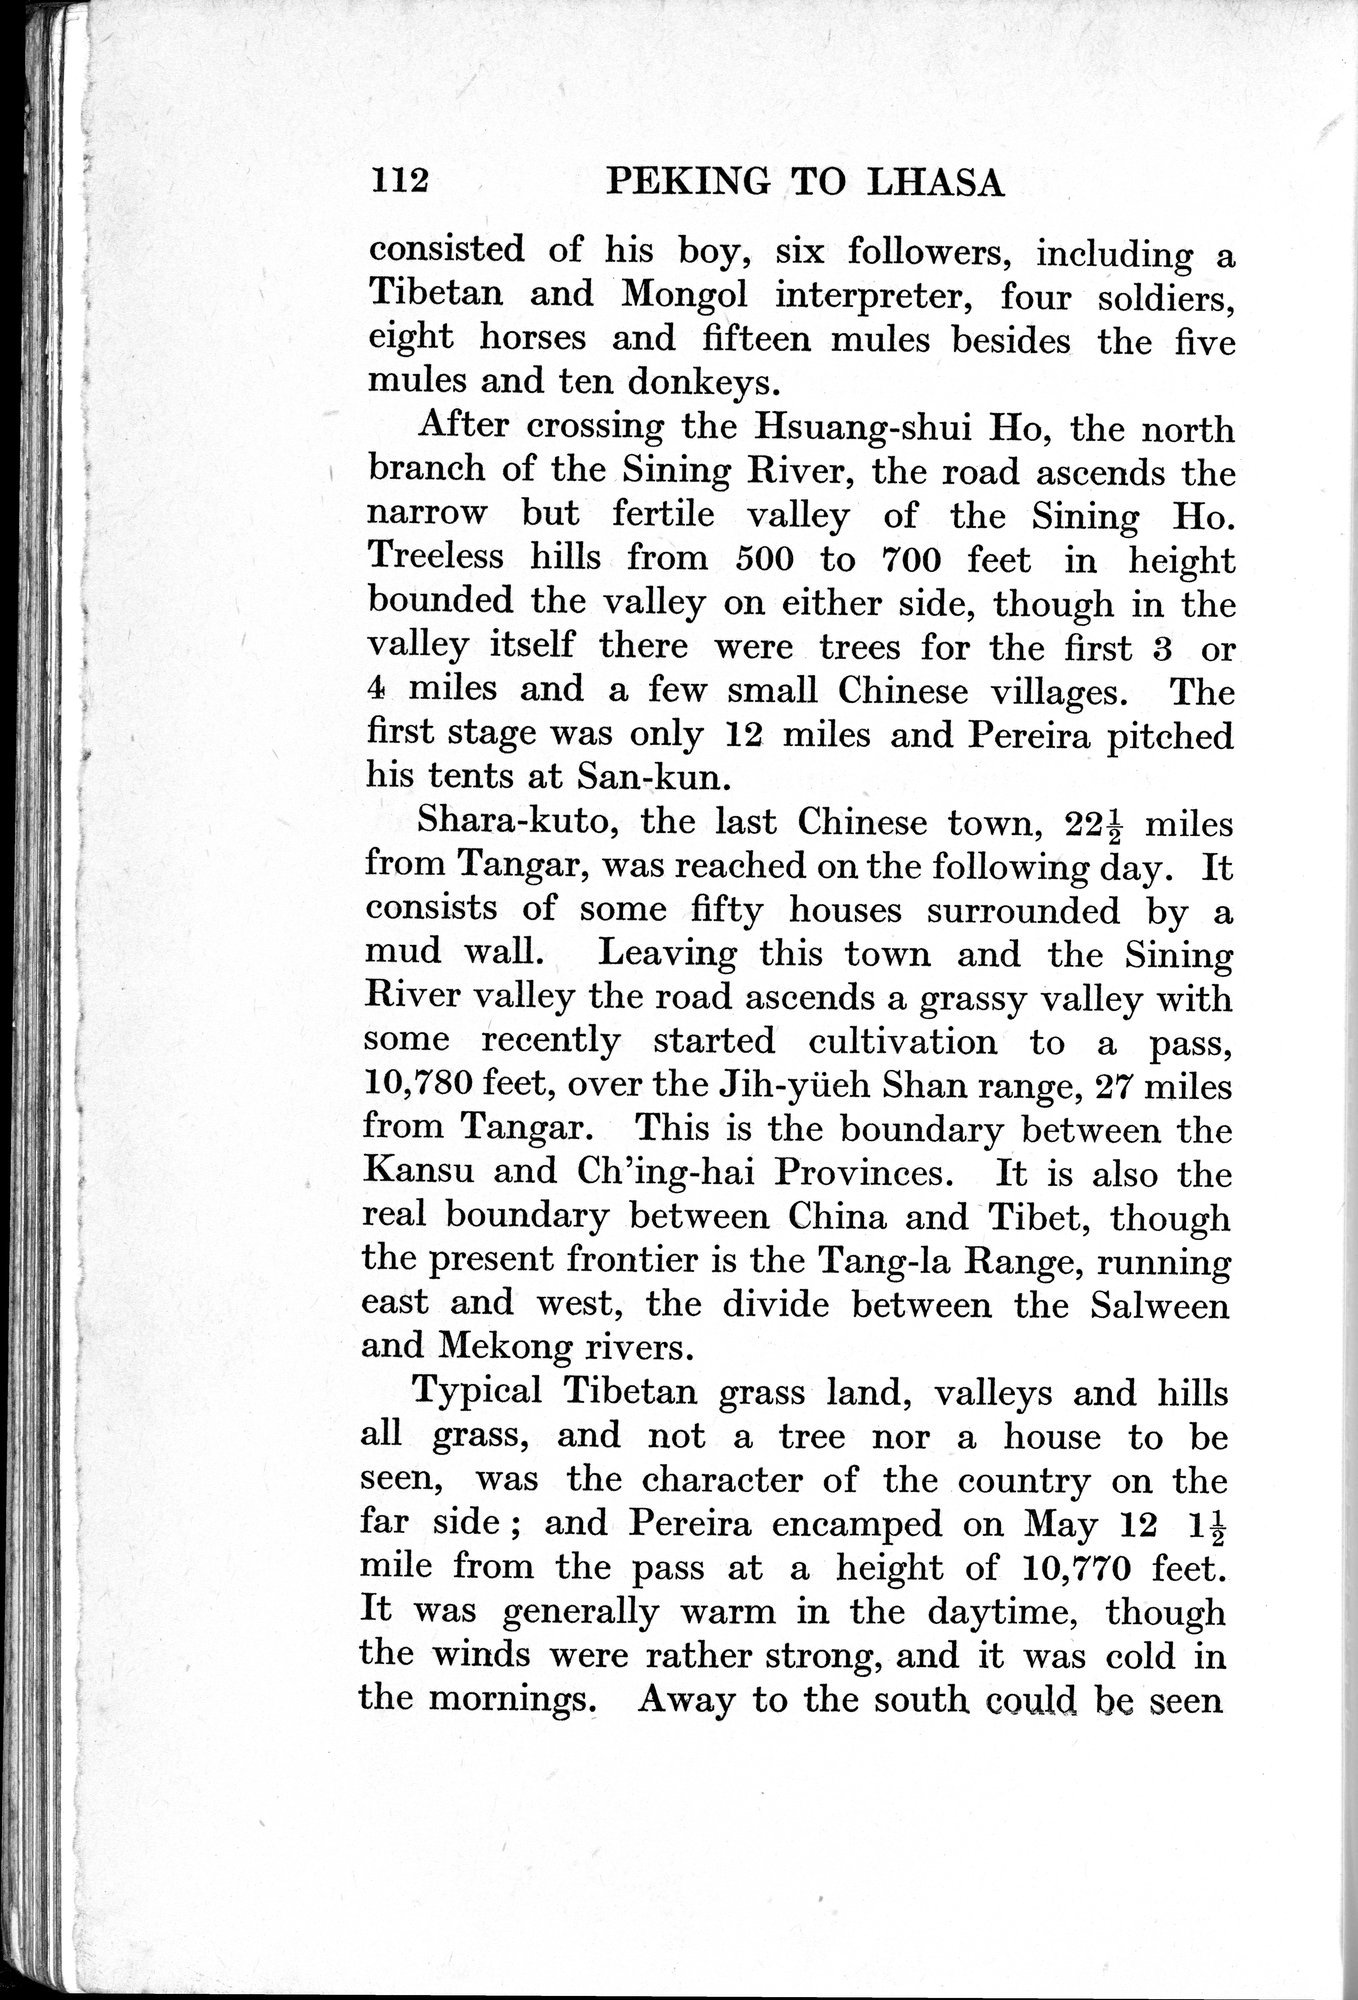 Peking to Lhasa : vol.1 / Page 148 (Grayscale High Resolution Image)